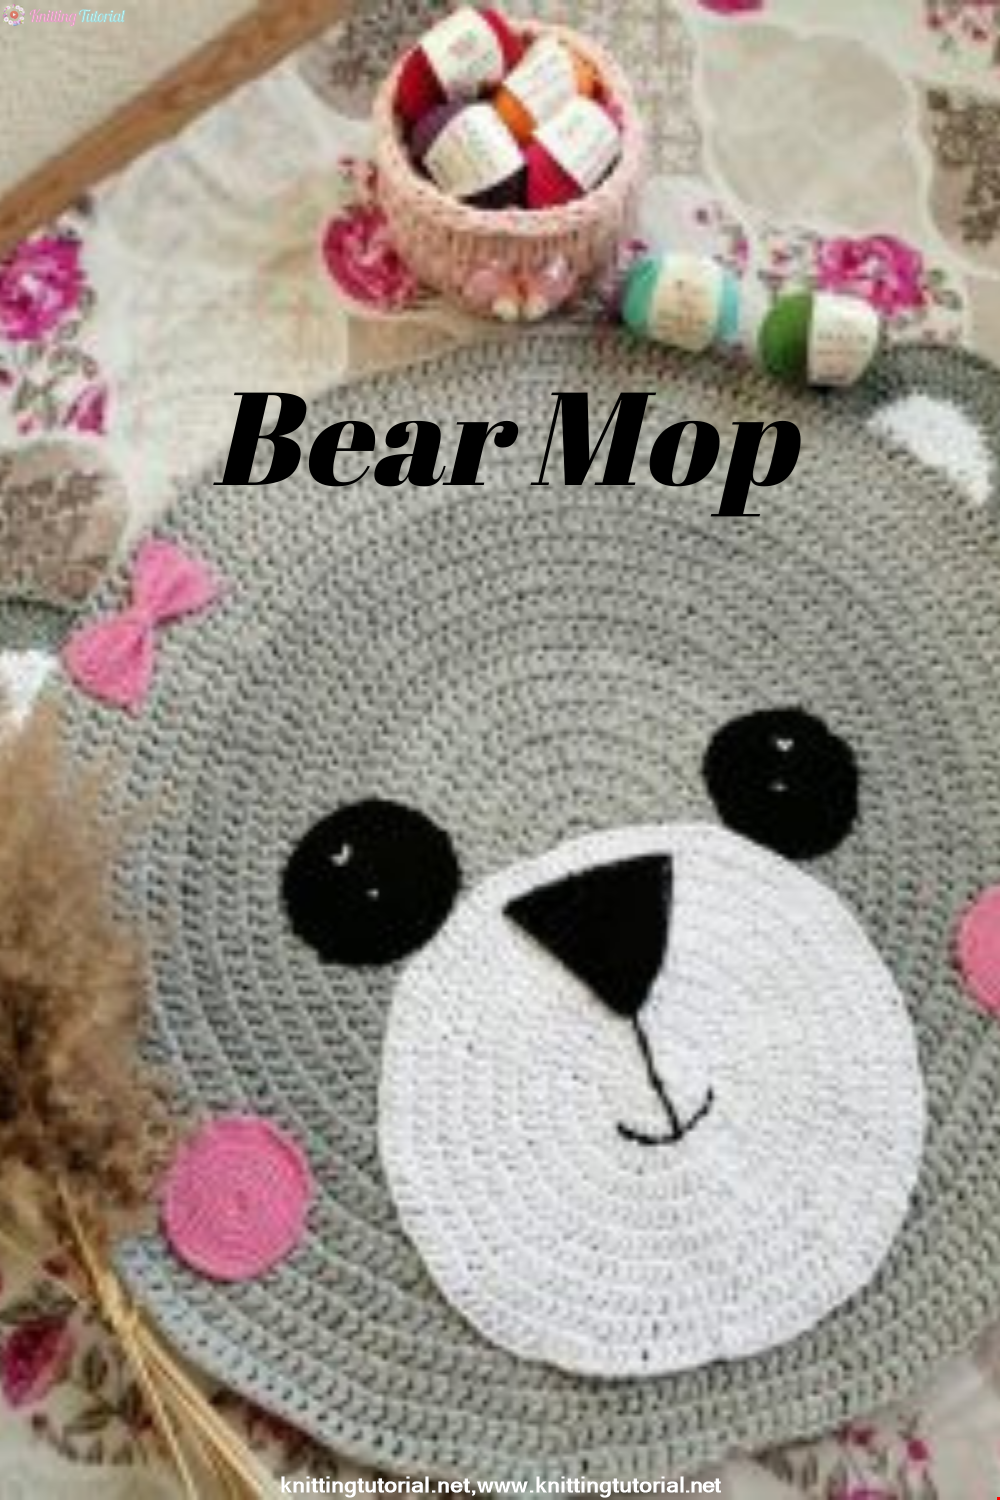 Sweet Teddy Bear Mop Making and Recipe for Your Home